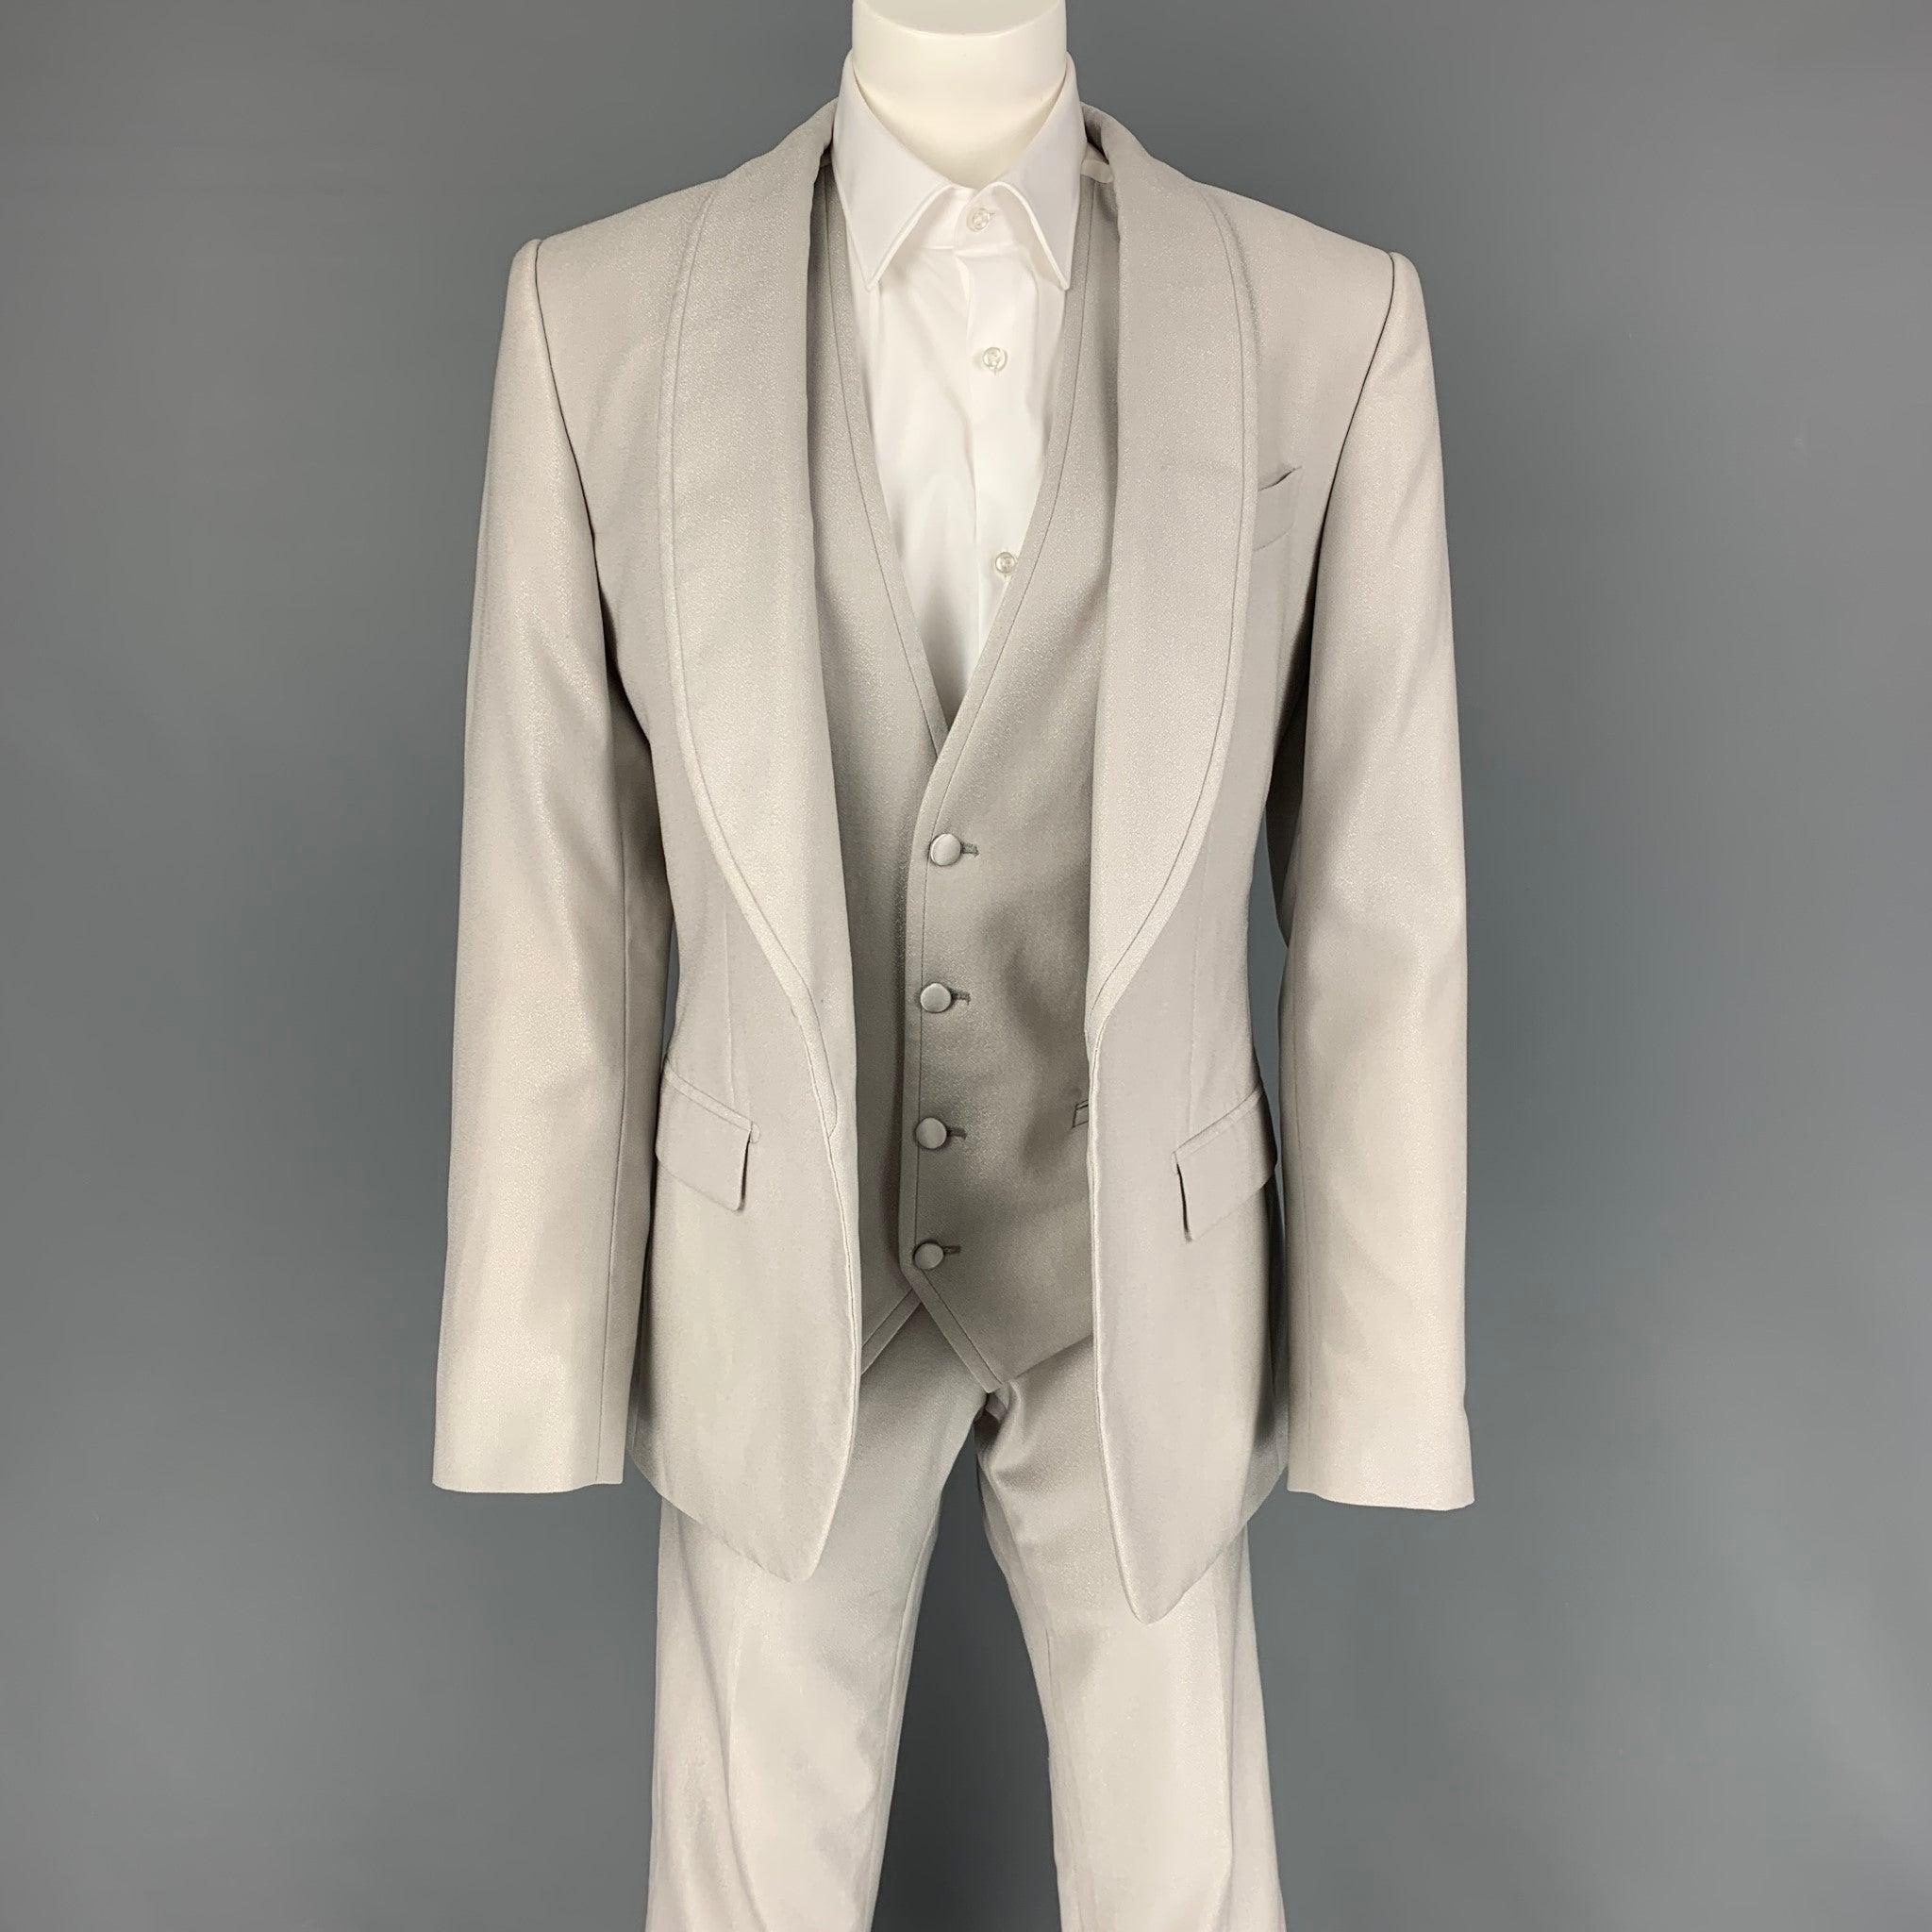 DOLCE & GABBANA Size 36 Regular Grey Wool Silk Shawl Lapel 3 Piece Suit In Good Condition For Sale In San Francisco, CA